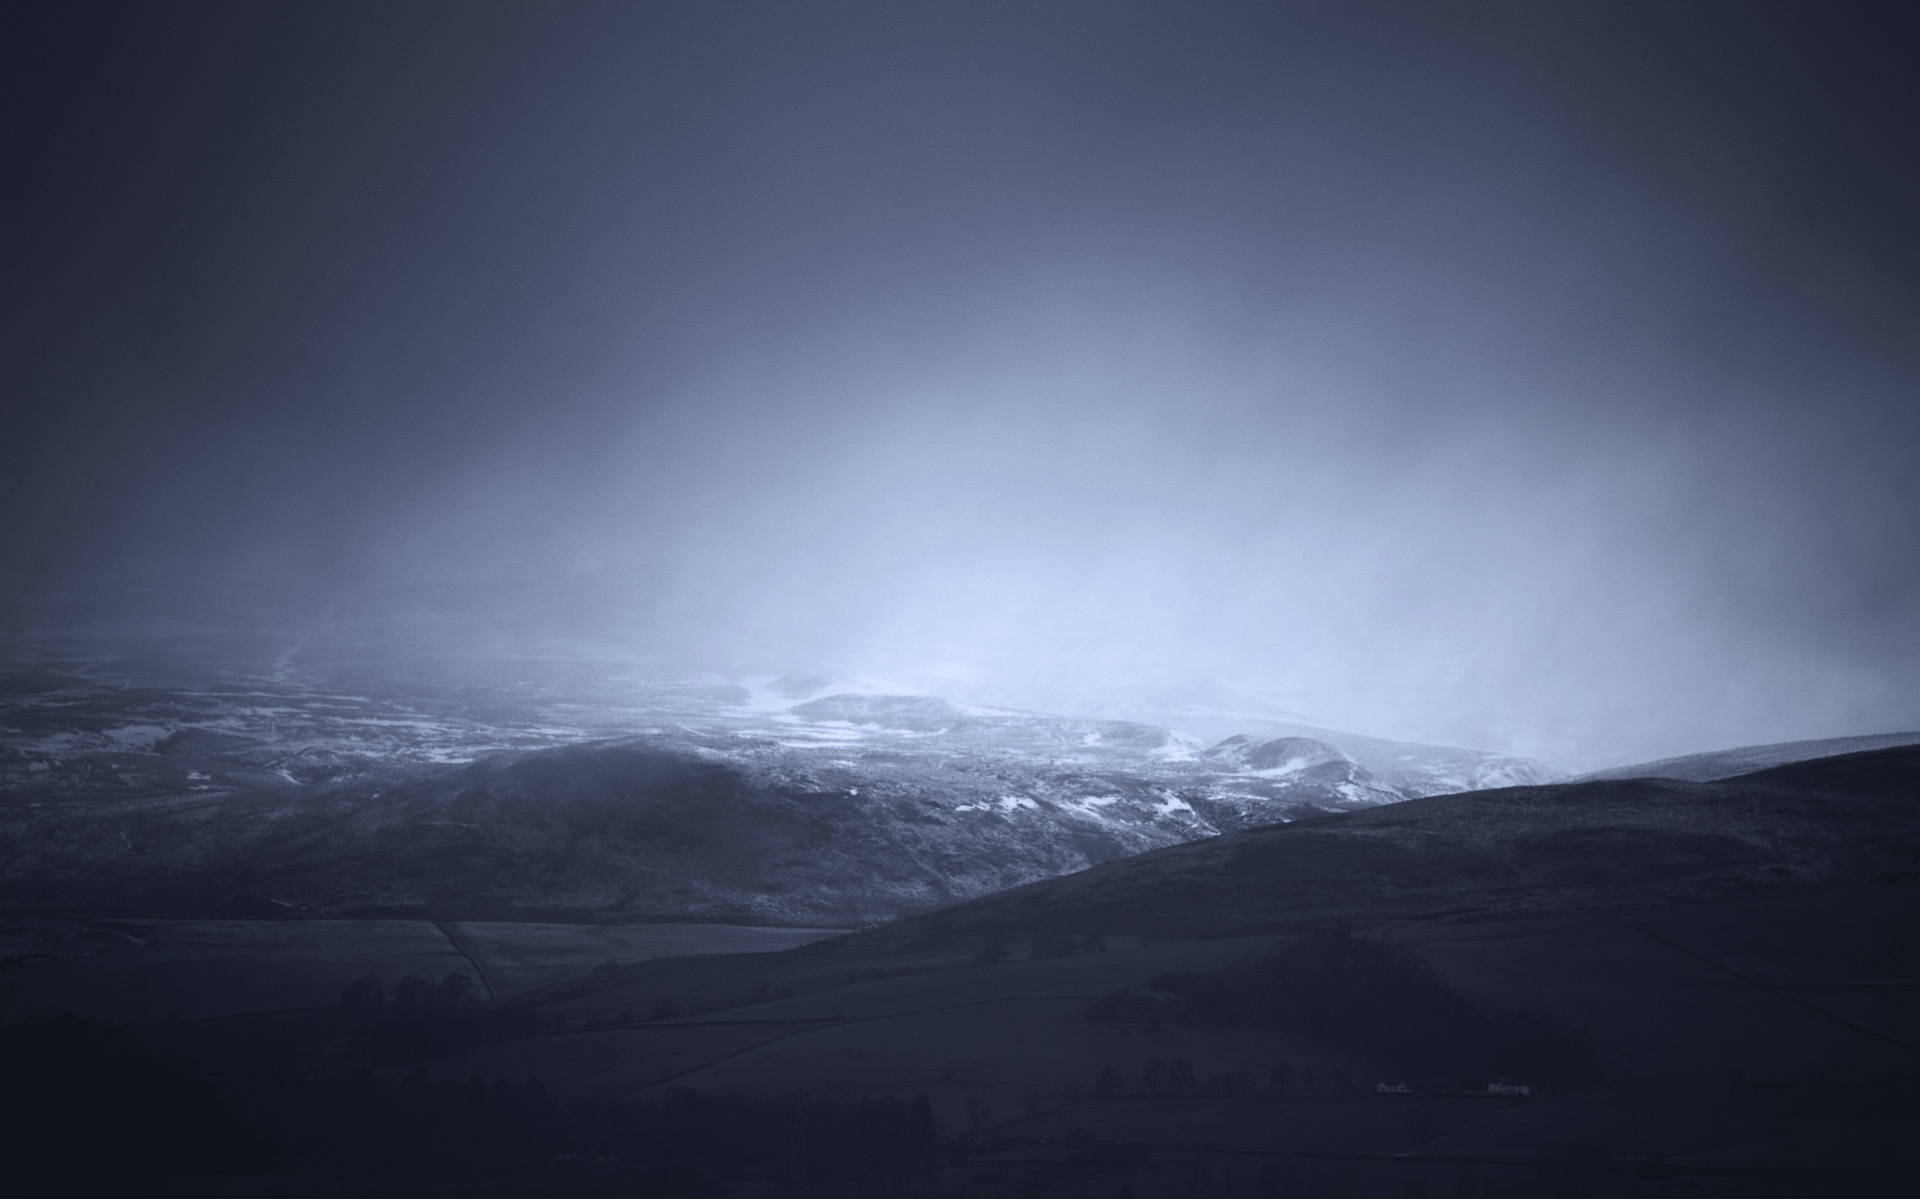 Cloudy Days 2: Passing Snow, Strathearn